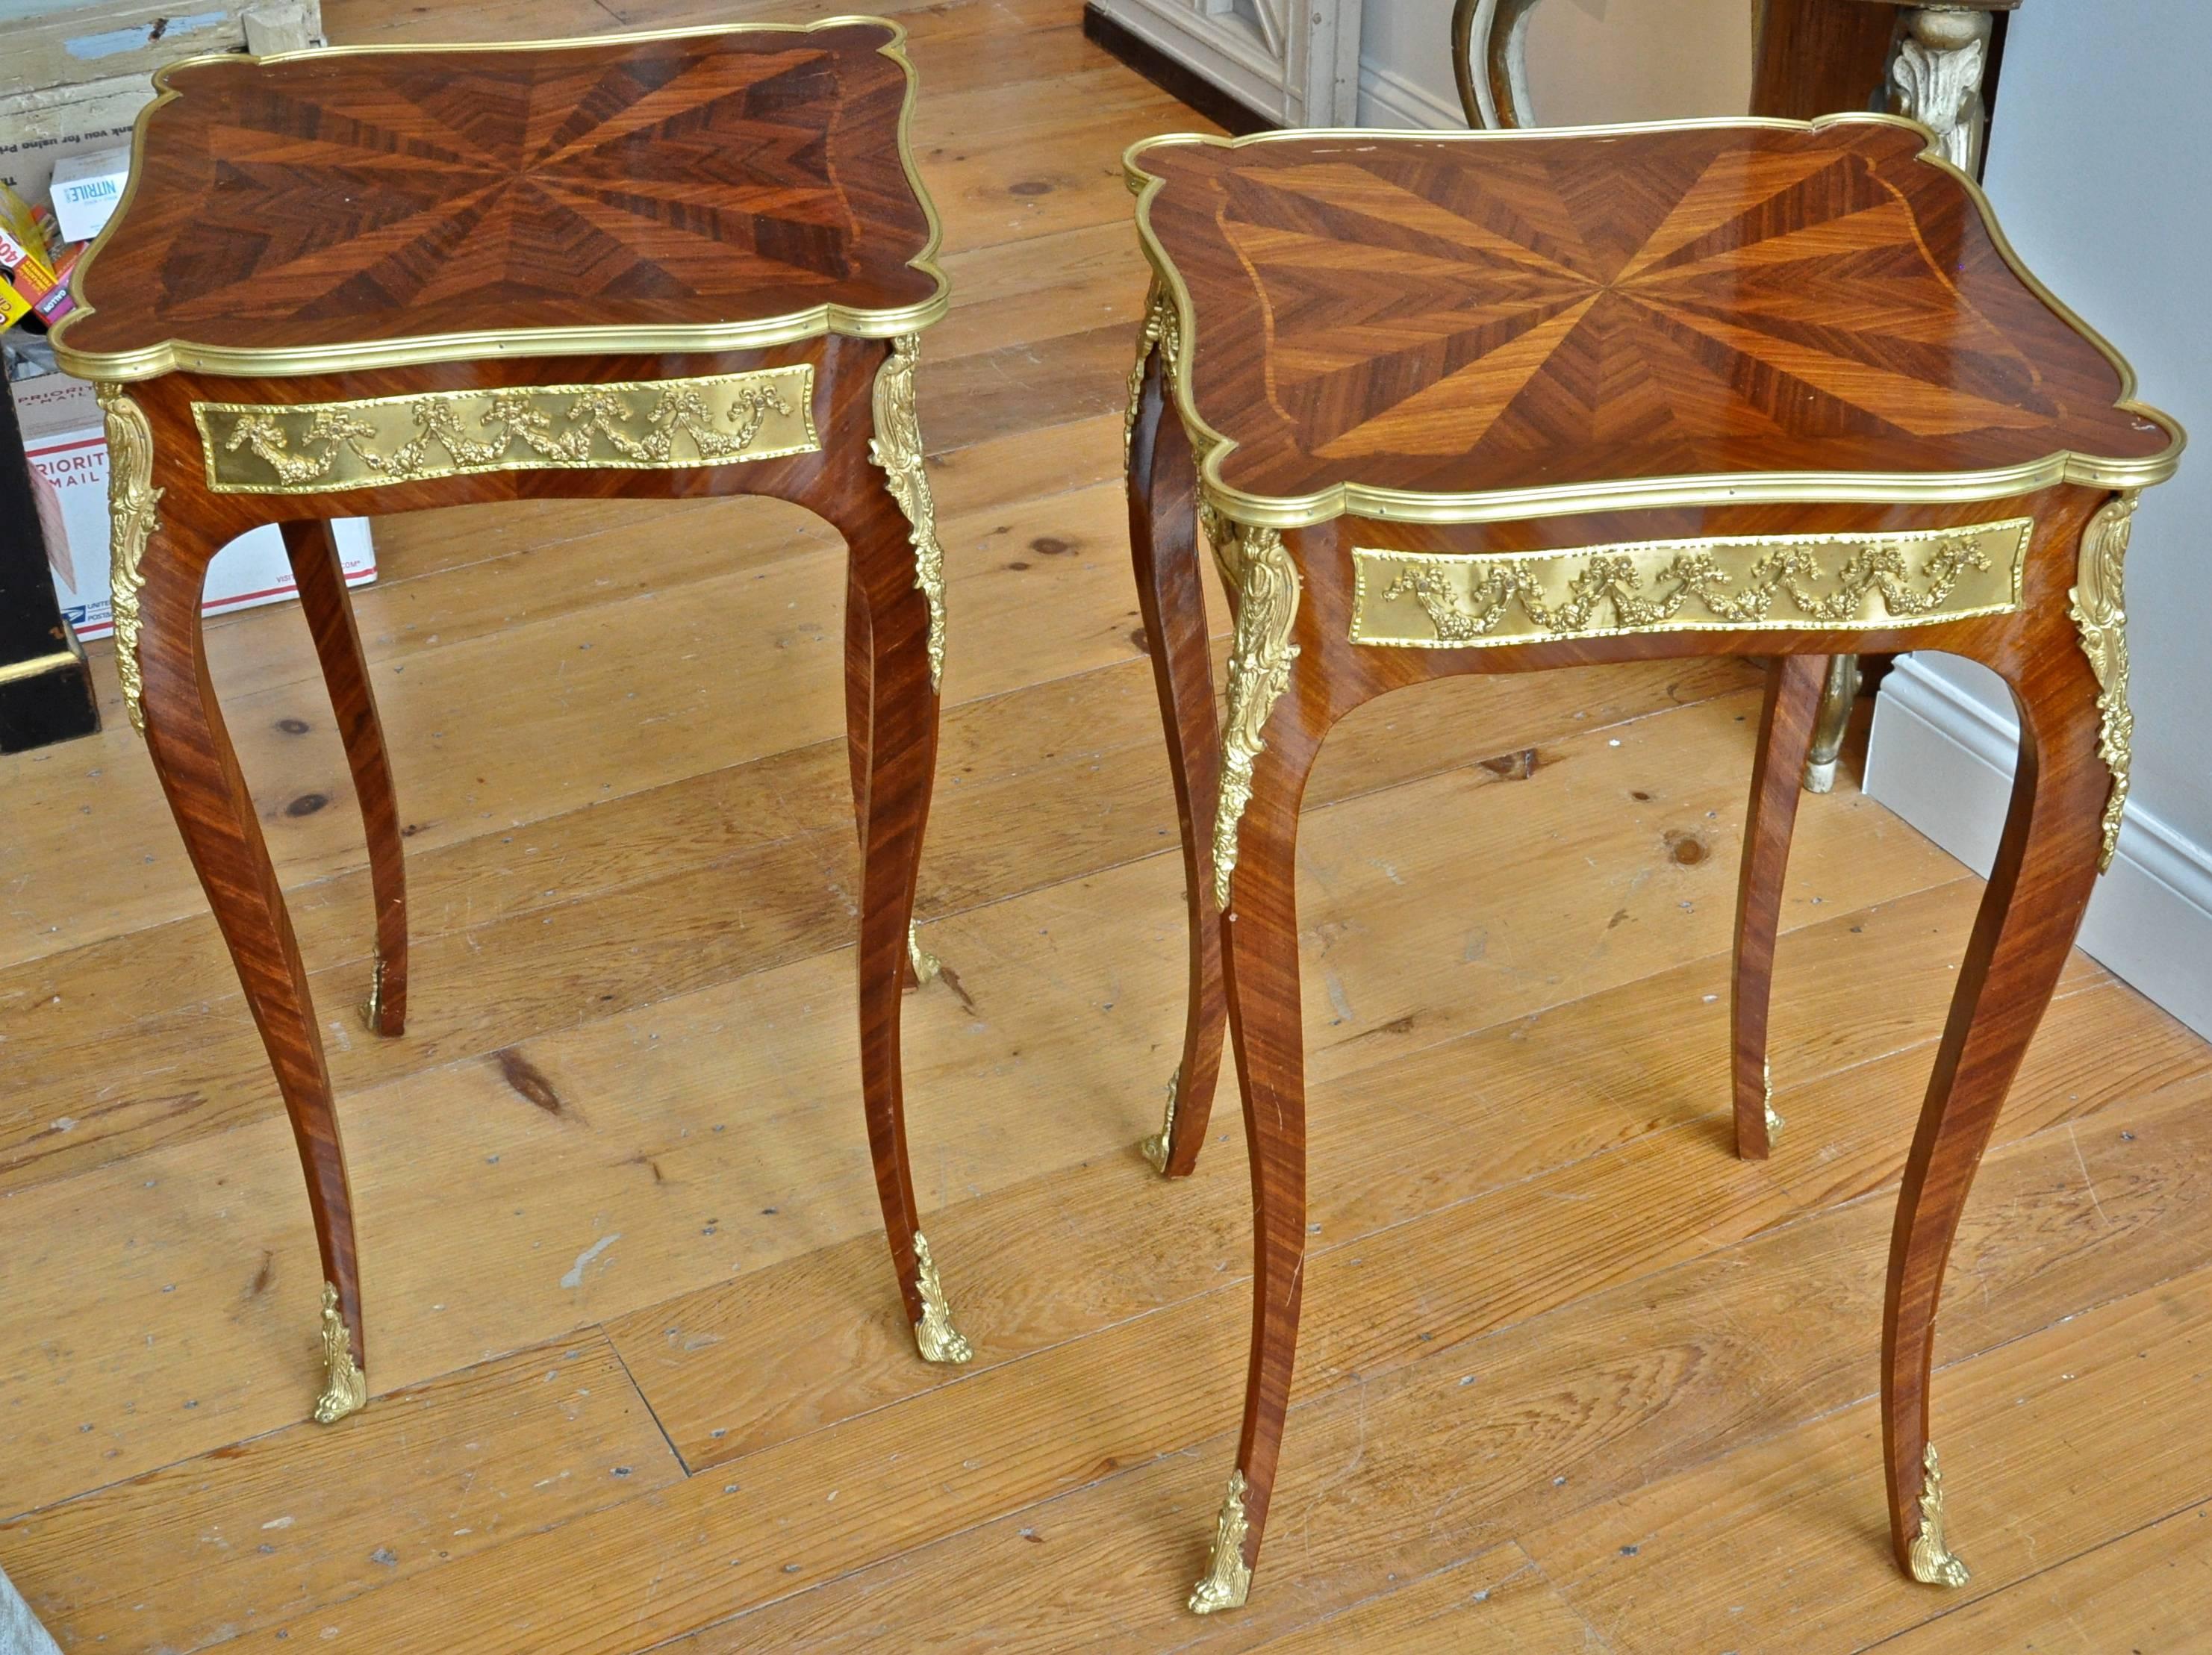 Pair of French Louis XV side tables in kingwood

Cabriole legs with sabot feet
Ormolu frieze of floral swags on all sides
Marquetry suburst top